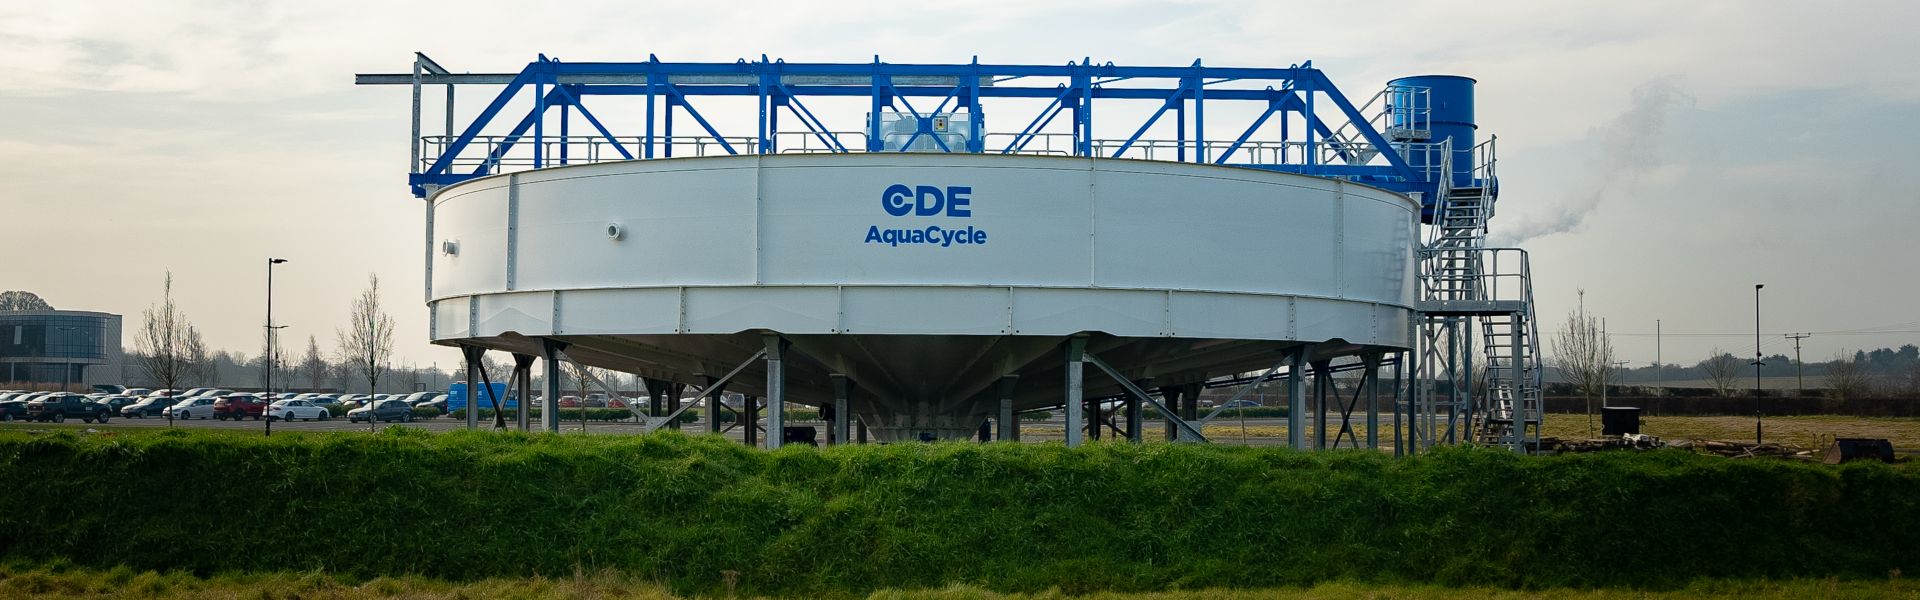 CDE launches its largest and most advanced water management system